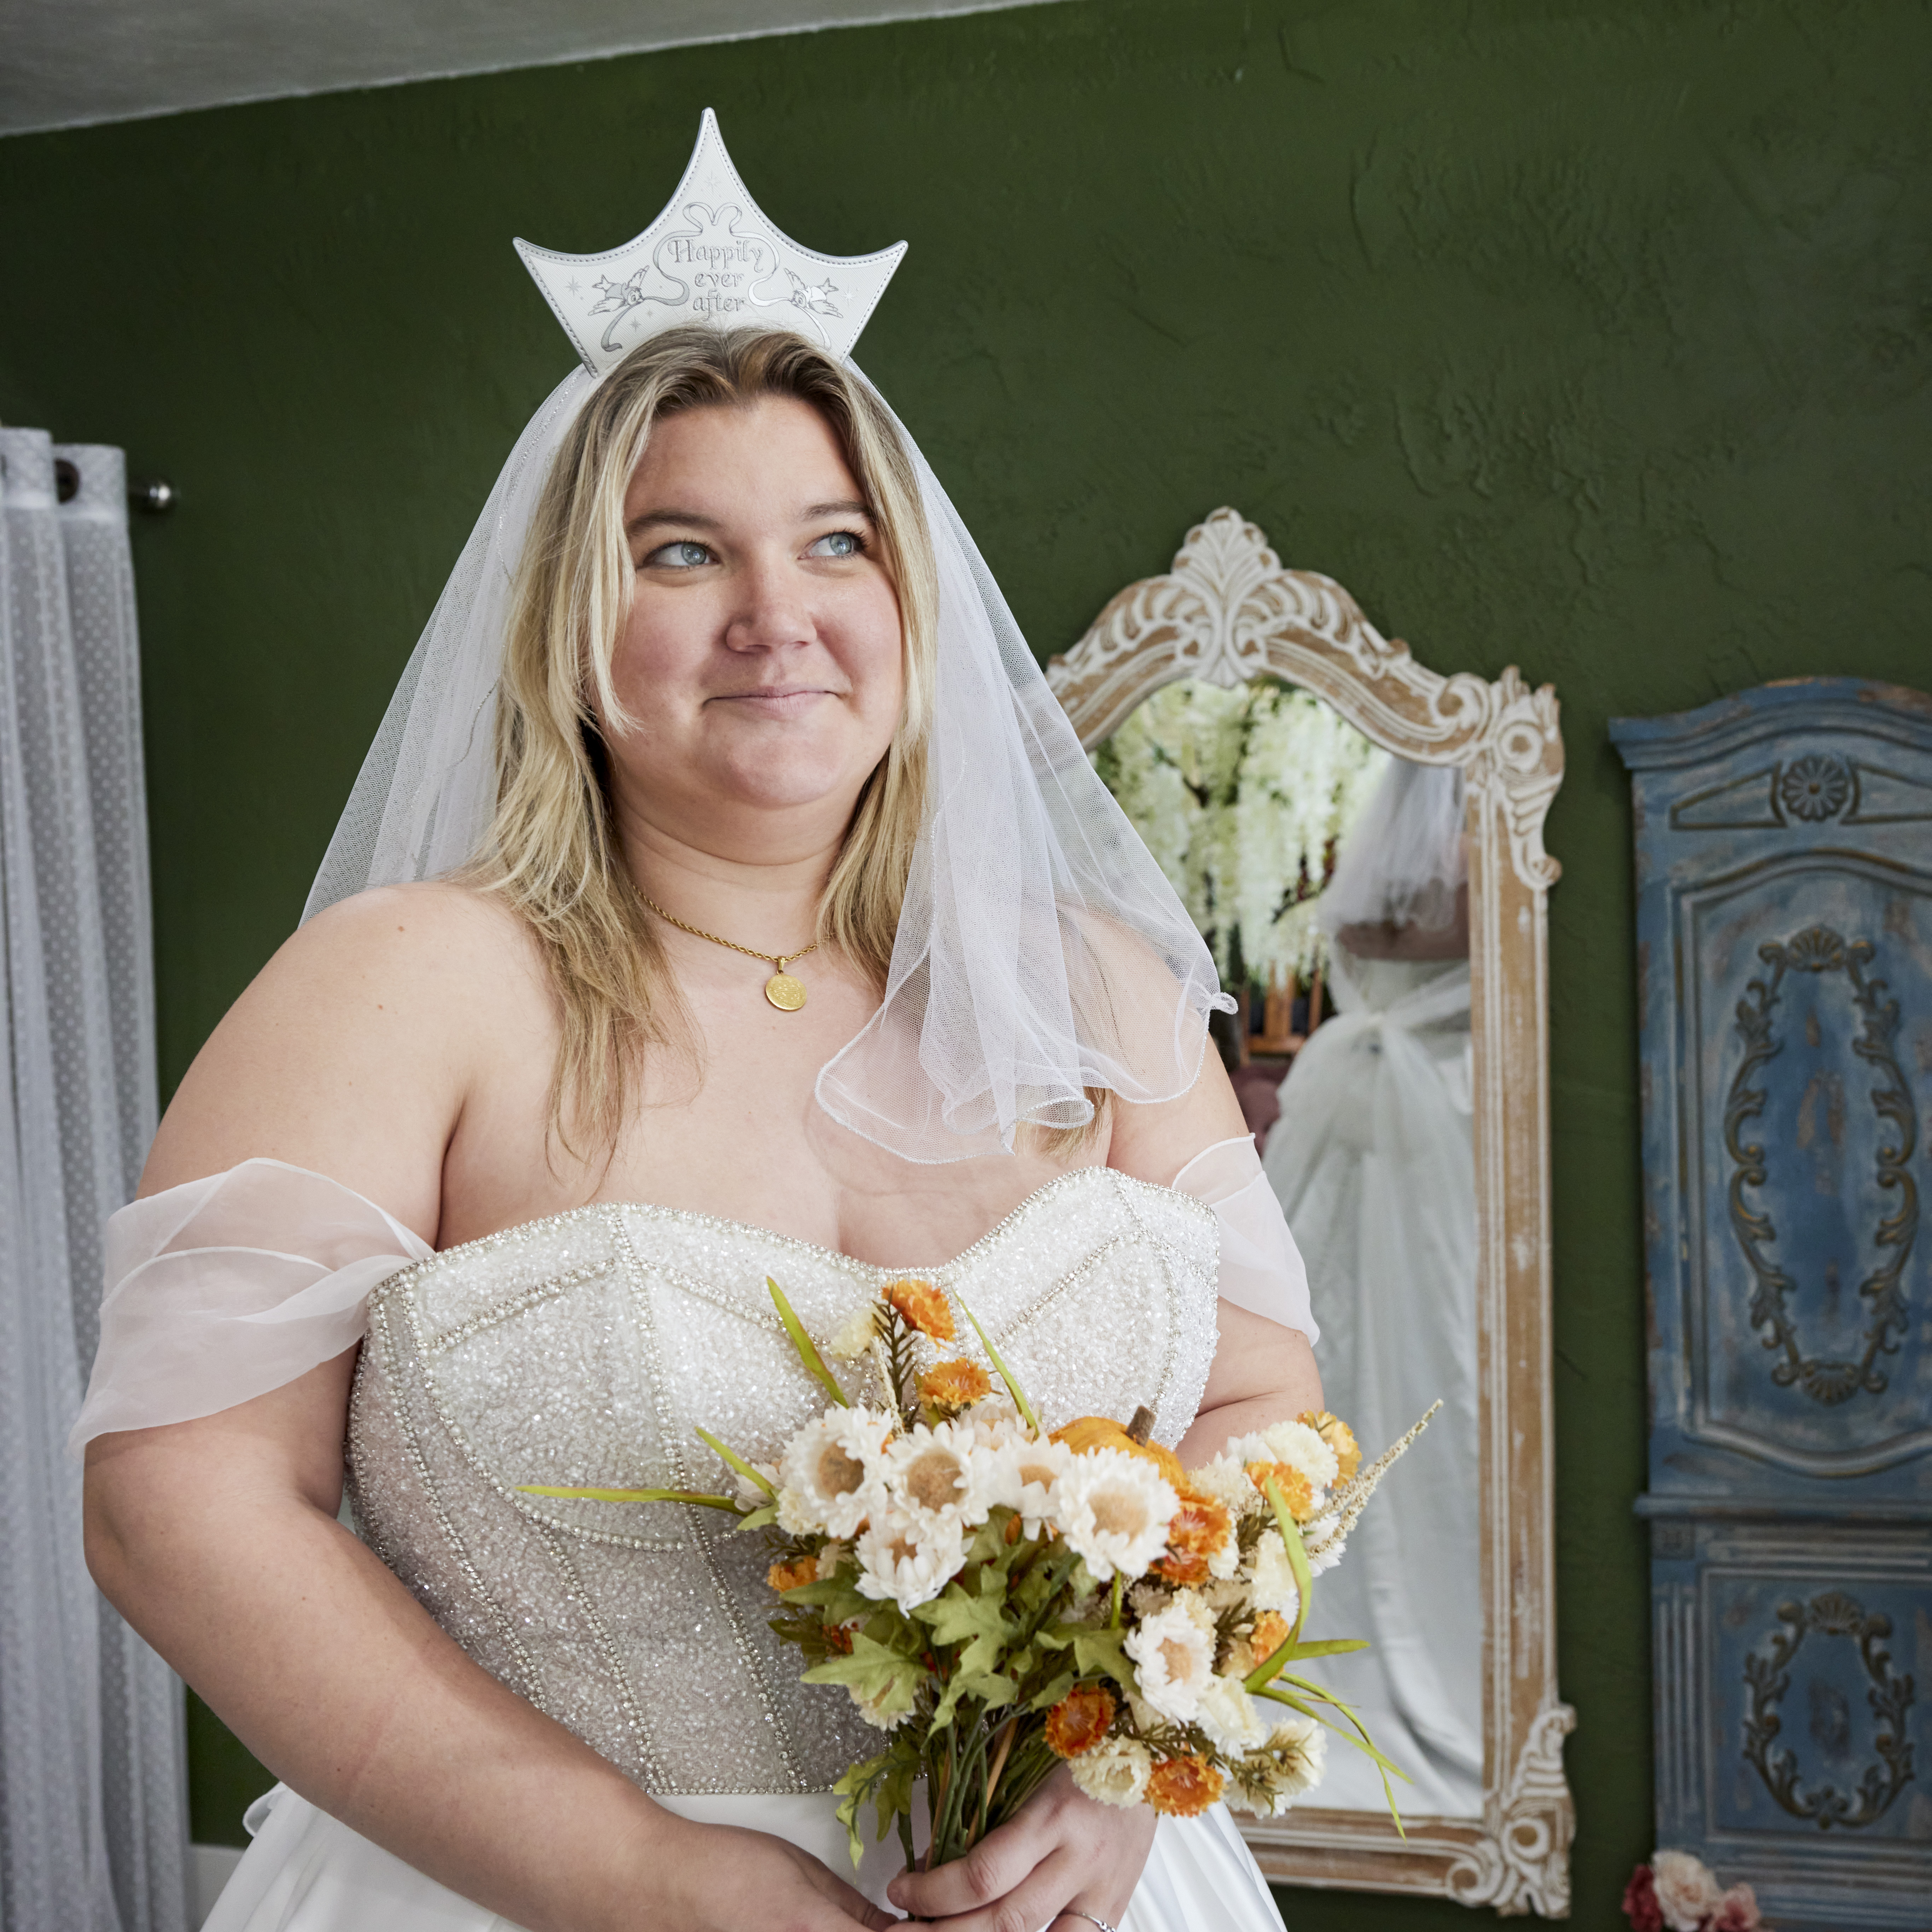 Woman wearing a wedding gown and holding a bouquet and wearing the Cinderella Happily Ever After Headband